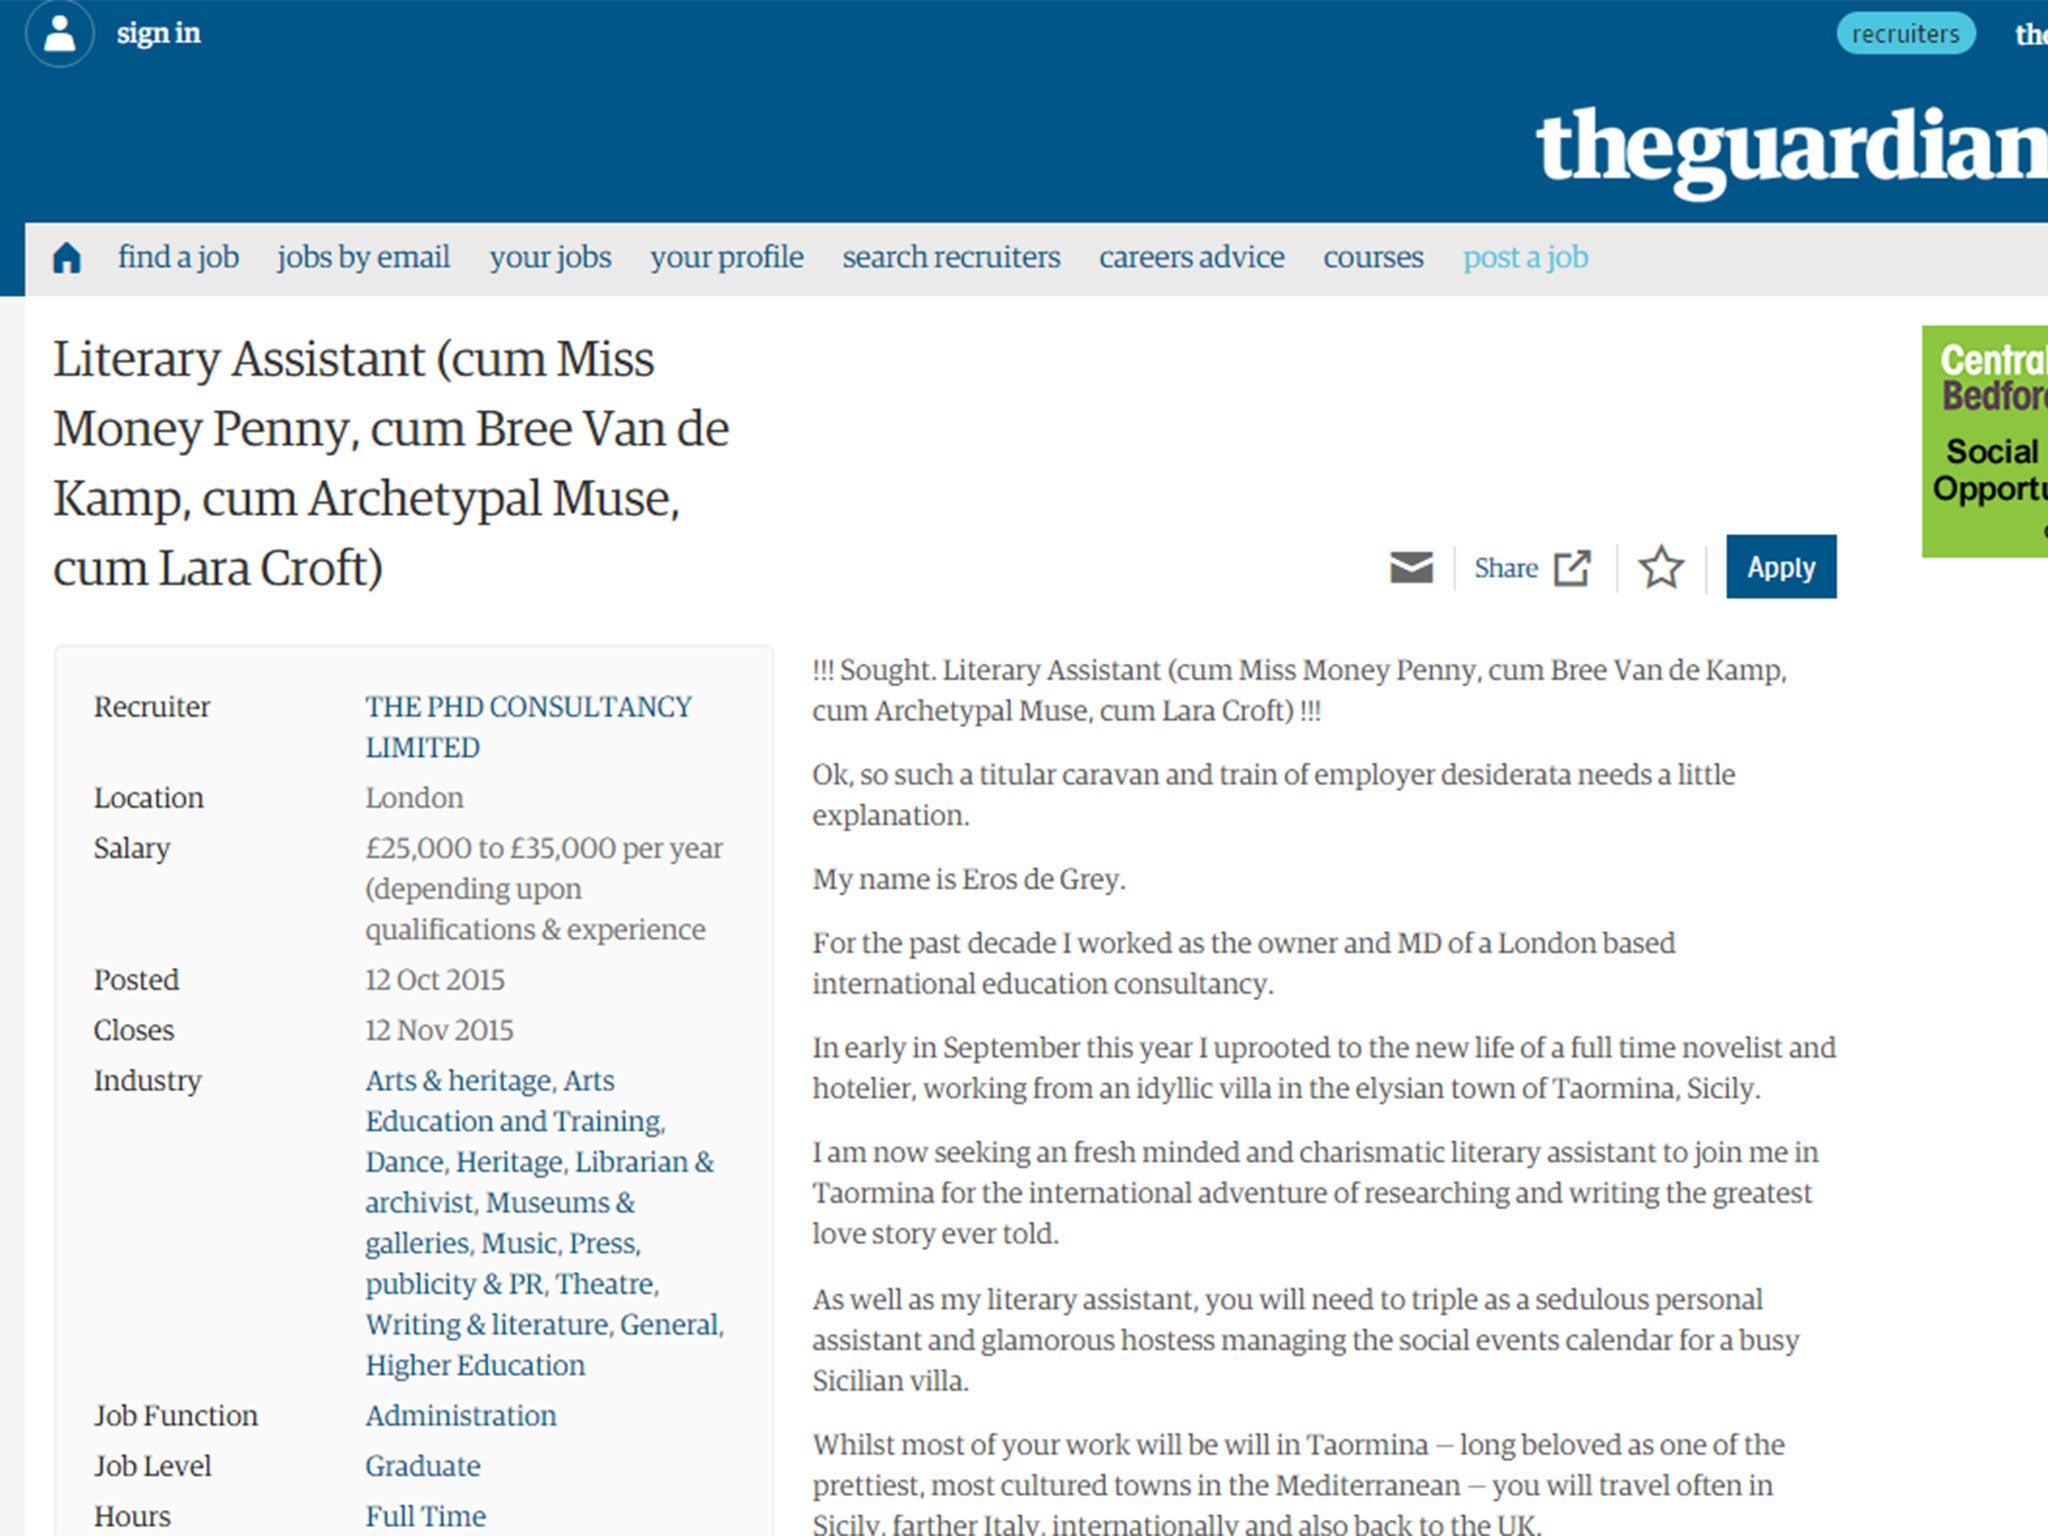 A screengrab of the 'worst advert ever' on Guardian Jobs